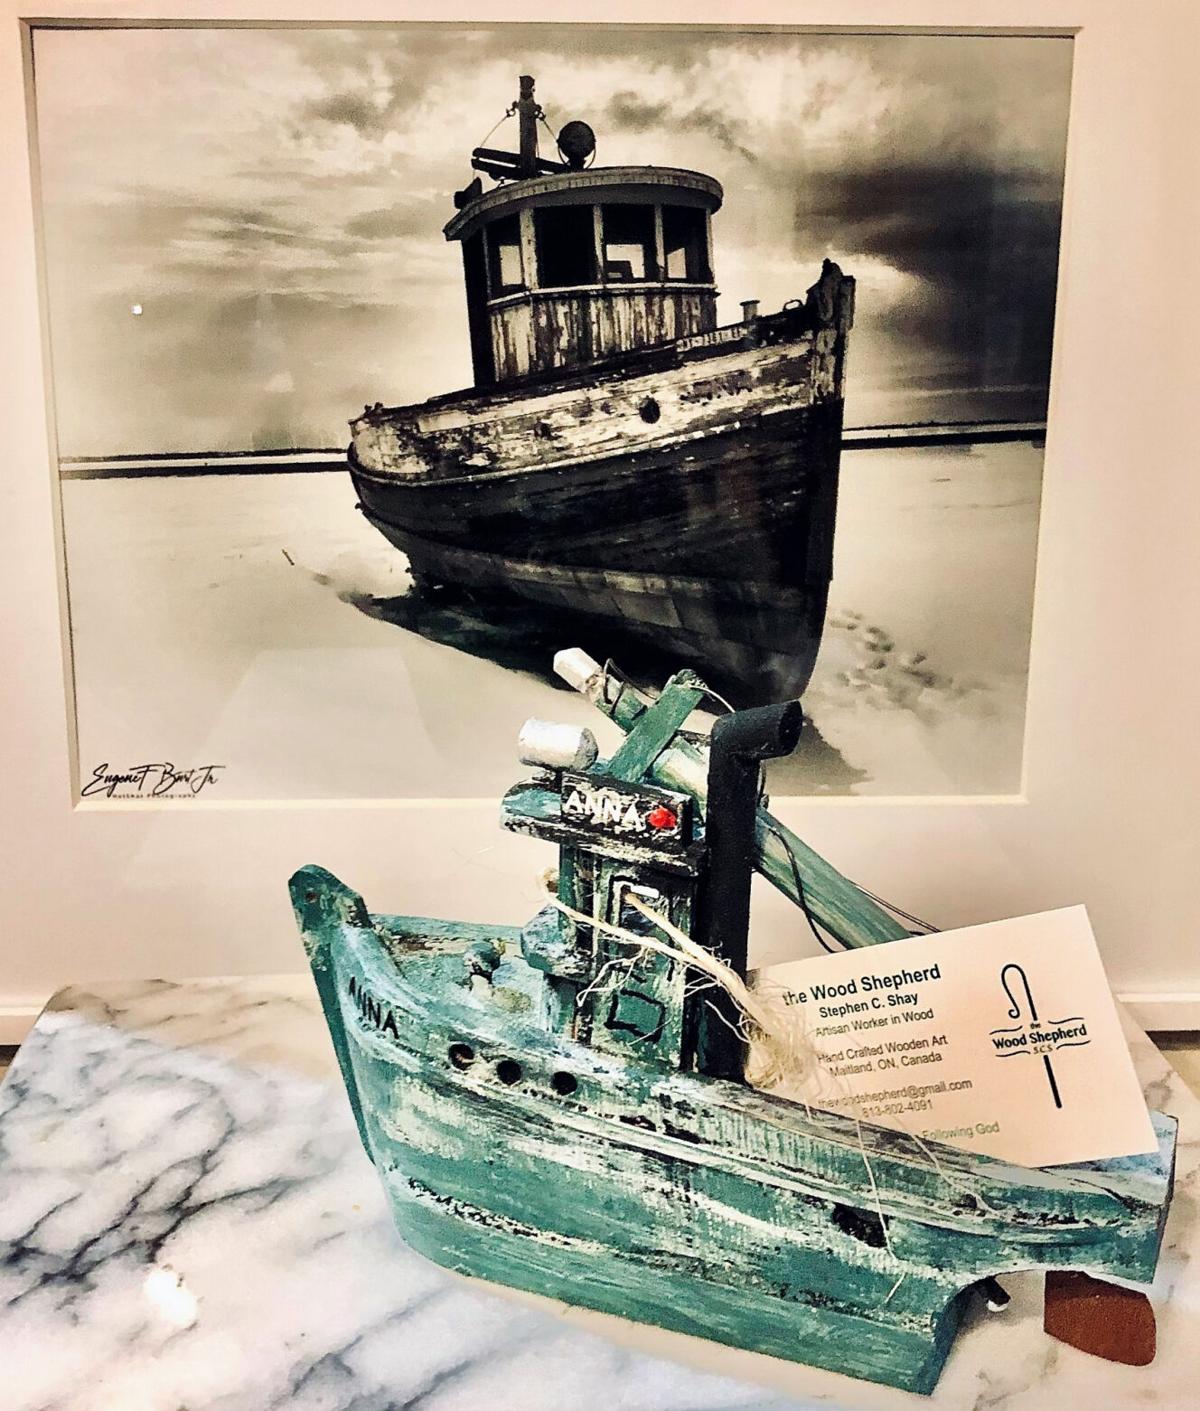 ‘The ART of ANNA’ Adoration for boat inspires summer art show